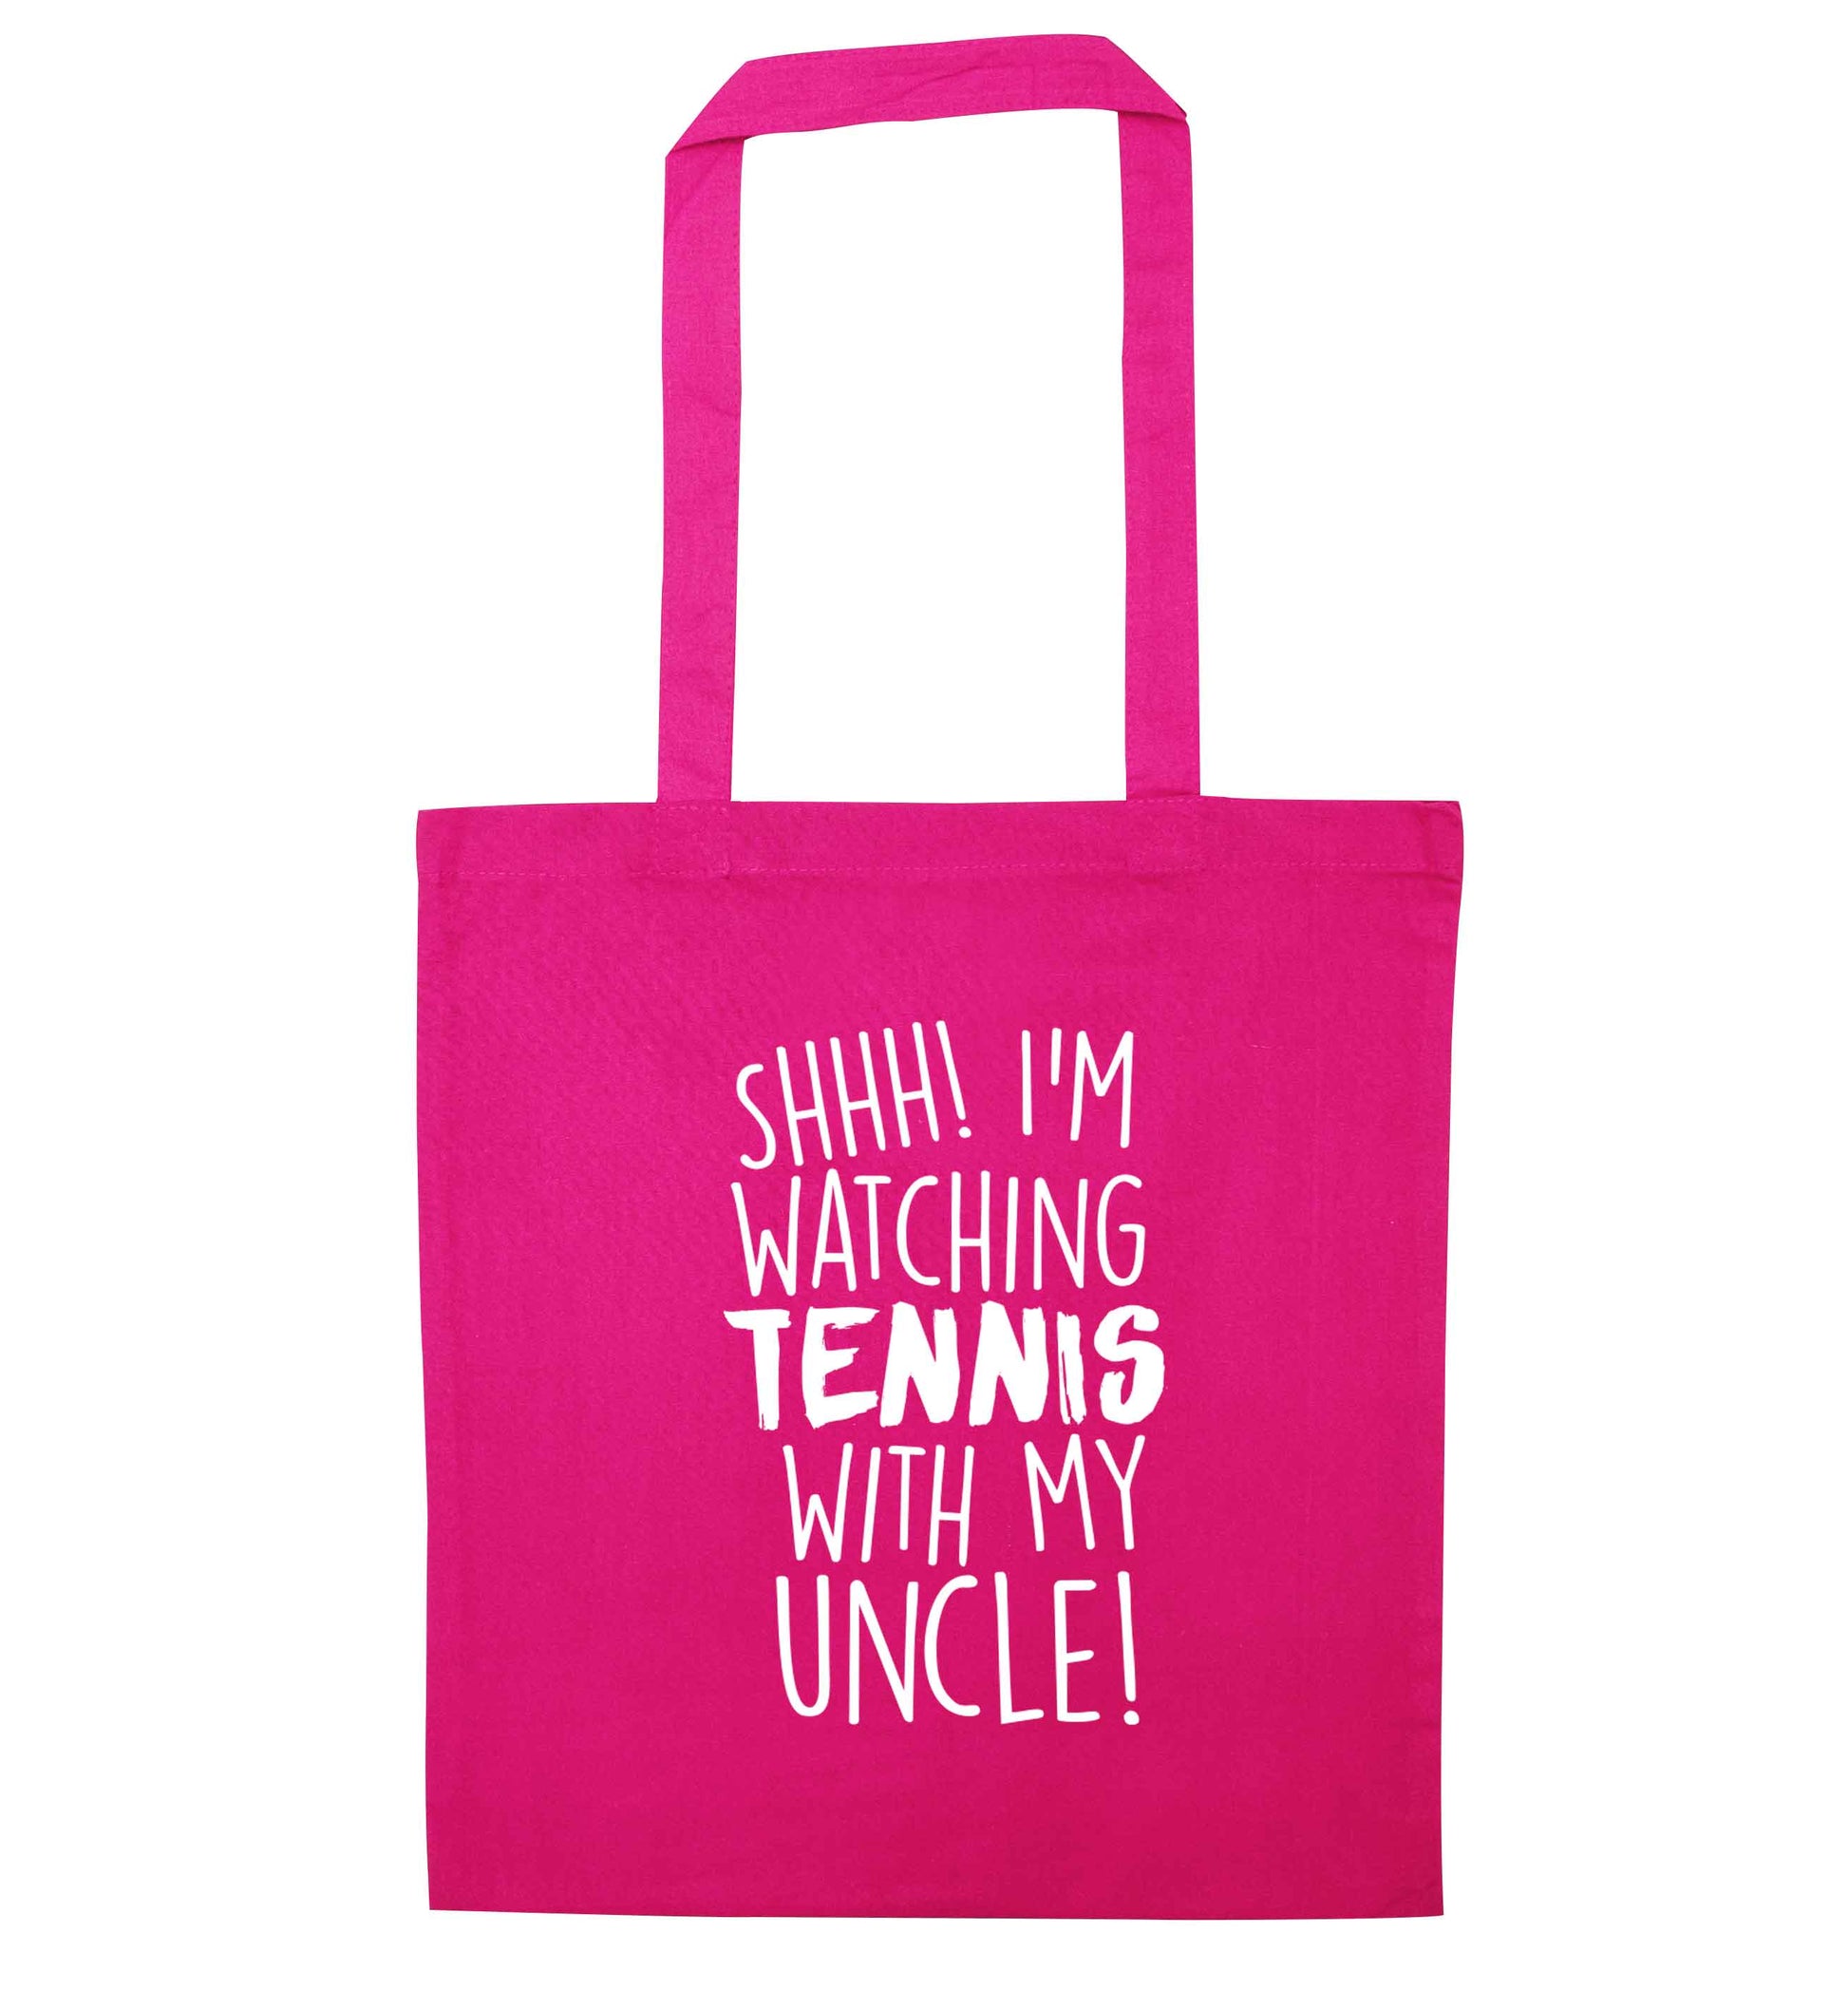 Shh! I'm watching tennis with my uncle! pink tote bag